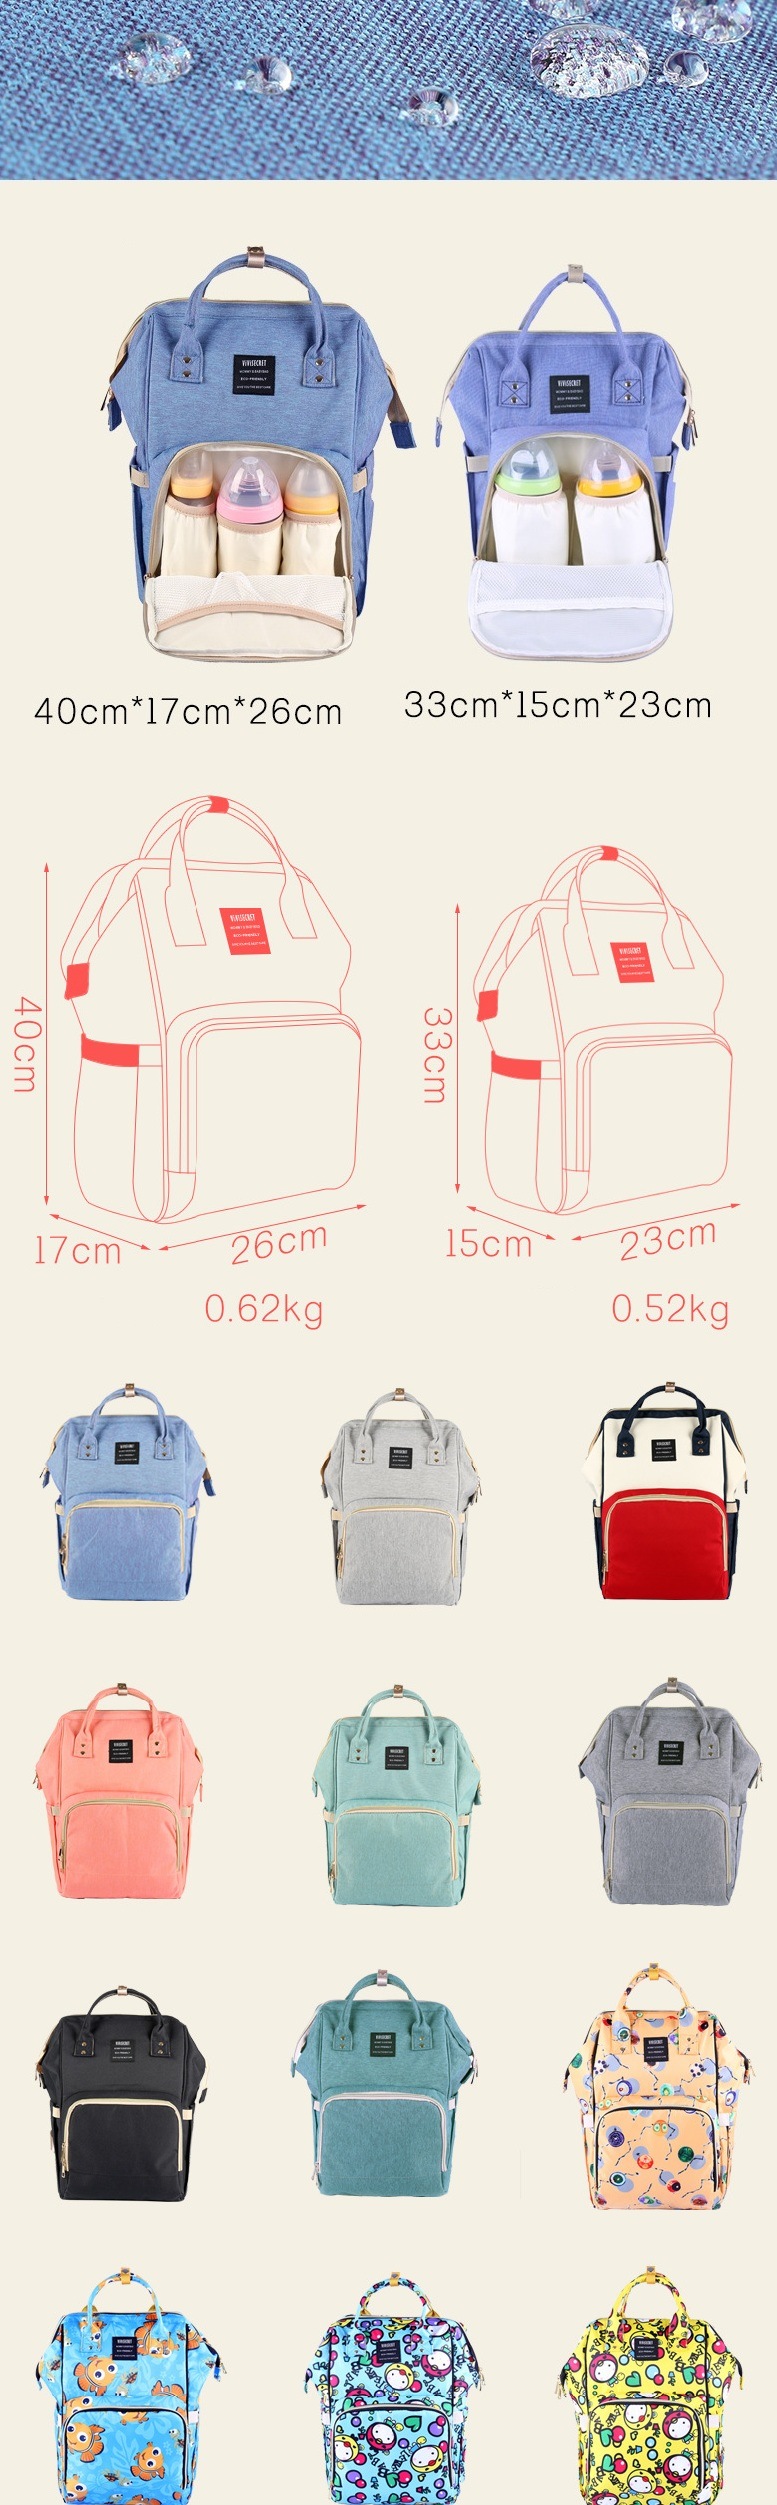 Outdoor Baby Mummy Cute Diaper Backpack Bag with Colorful Printing